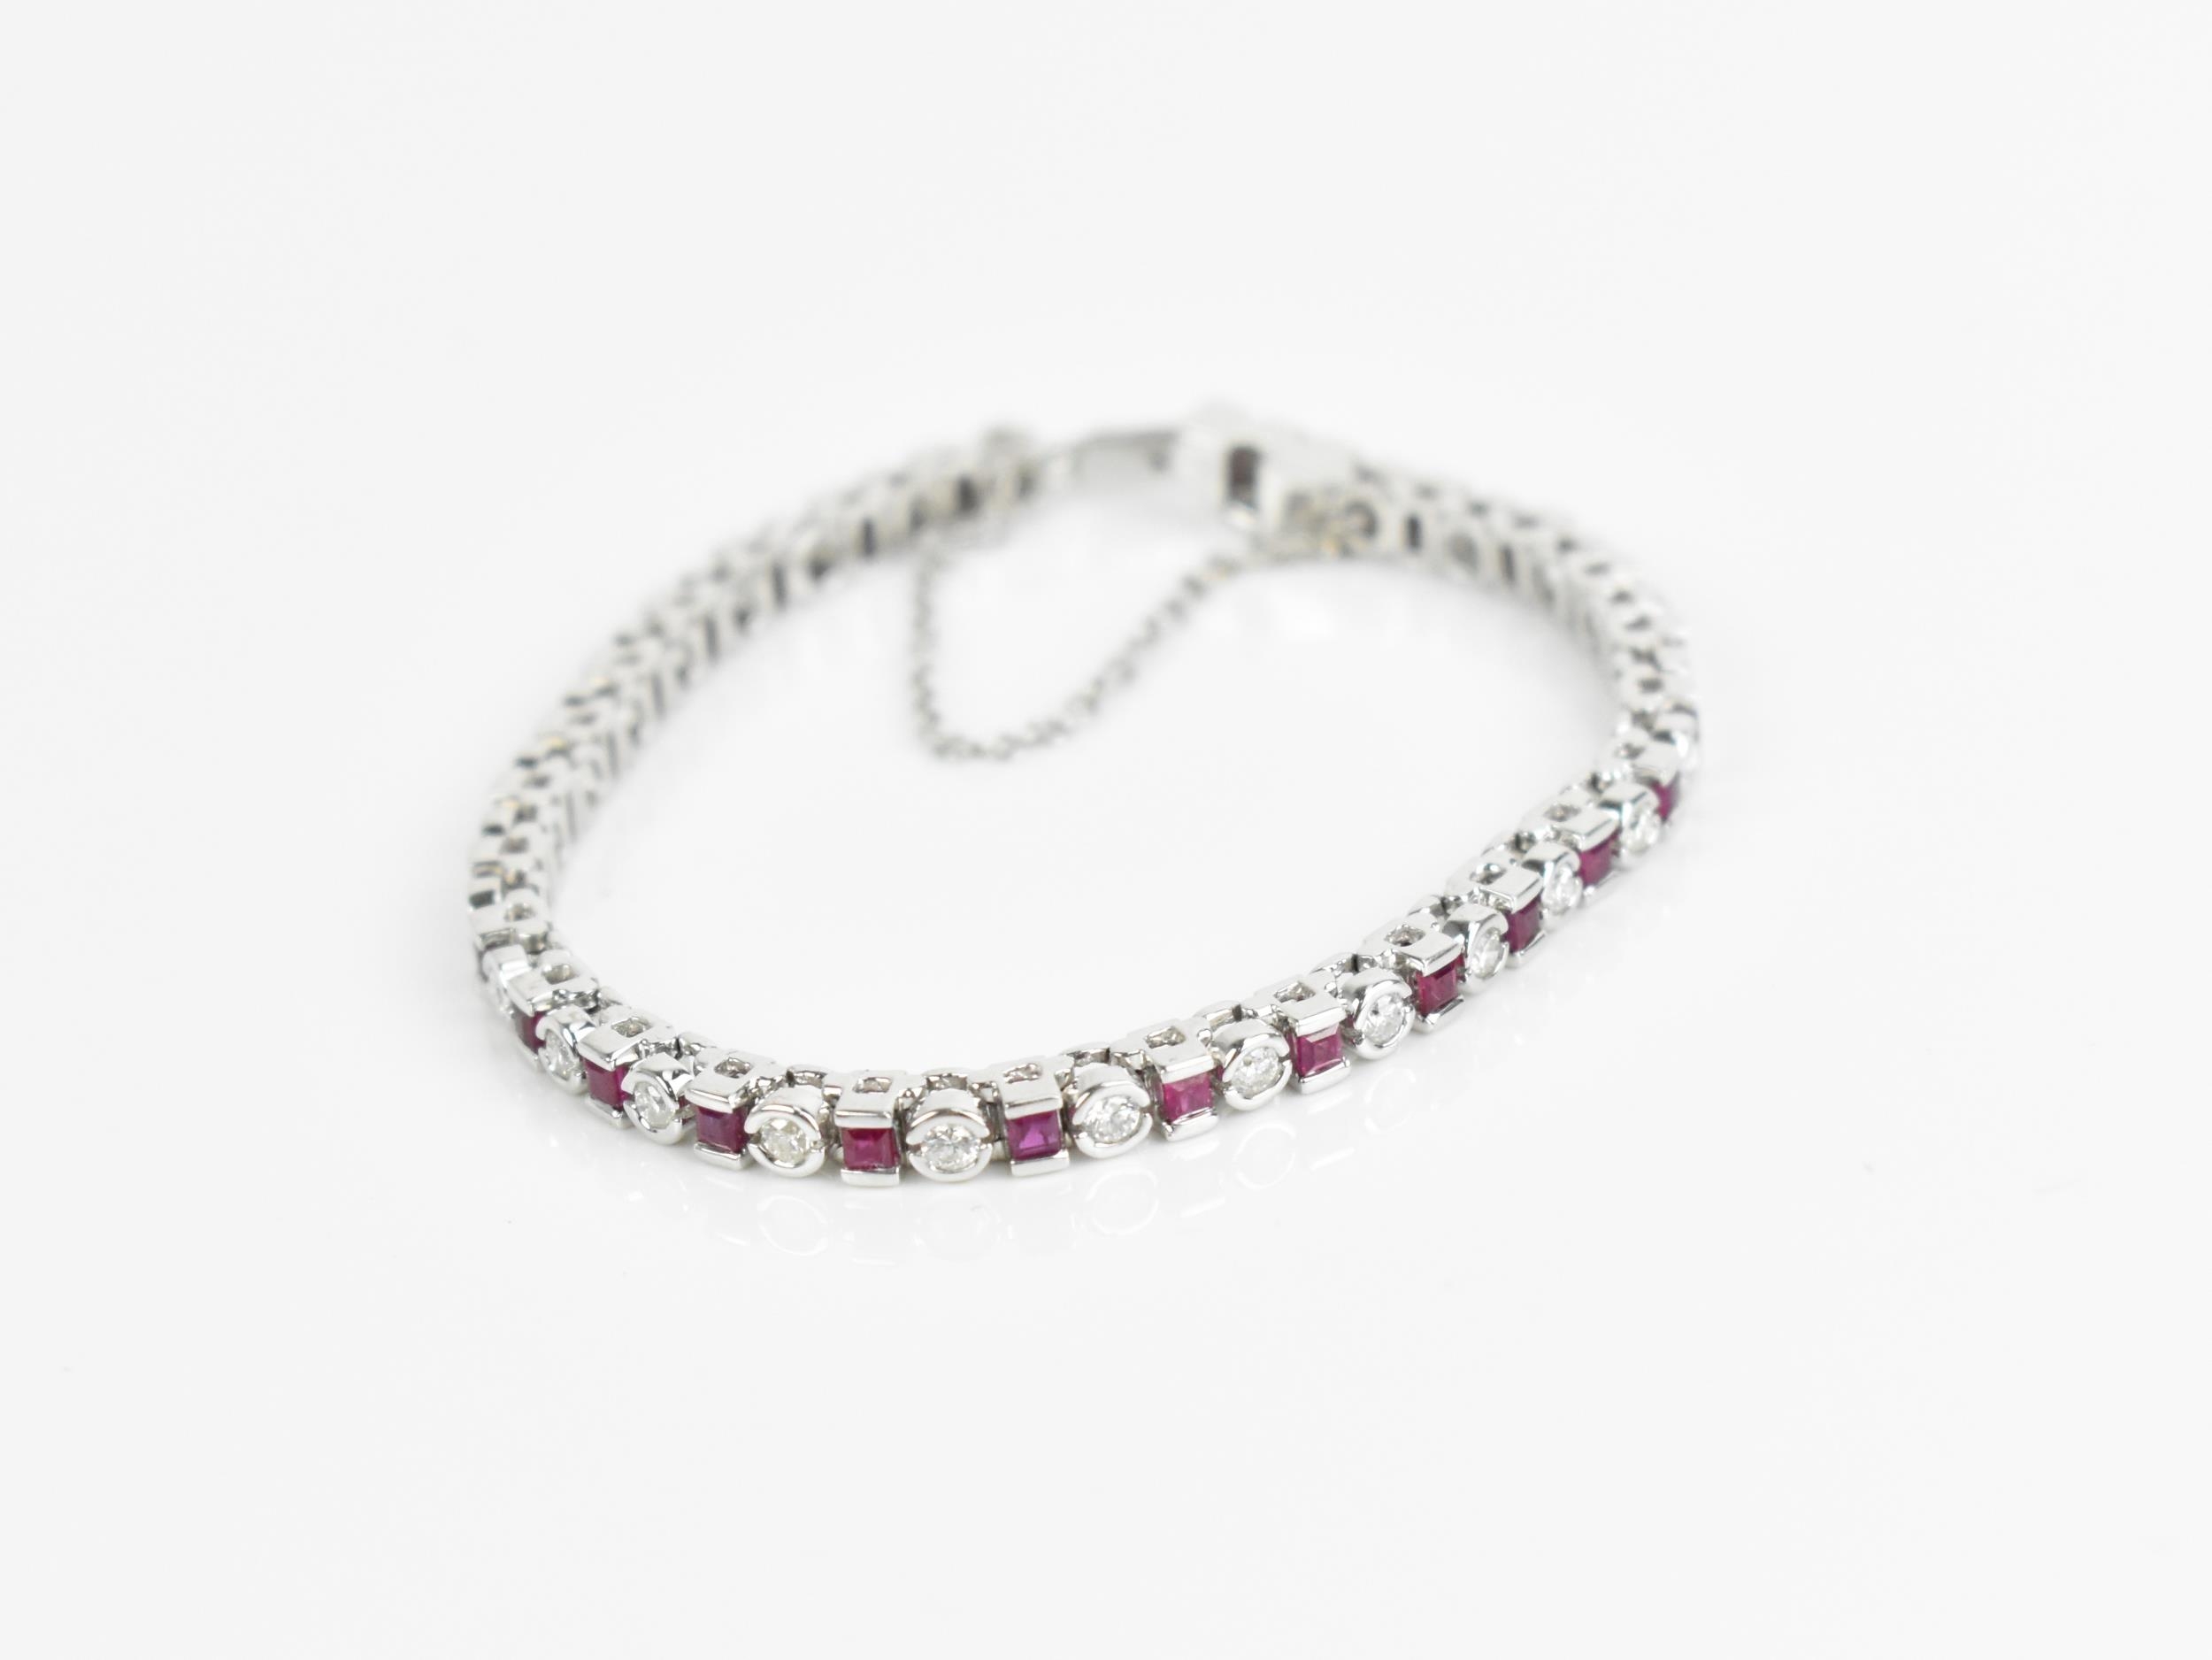 An 18ct white gold, diamond and ruby bracelet, with alternating round brilliant cut diamond and - Image 8 of 8